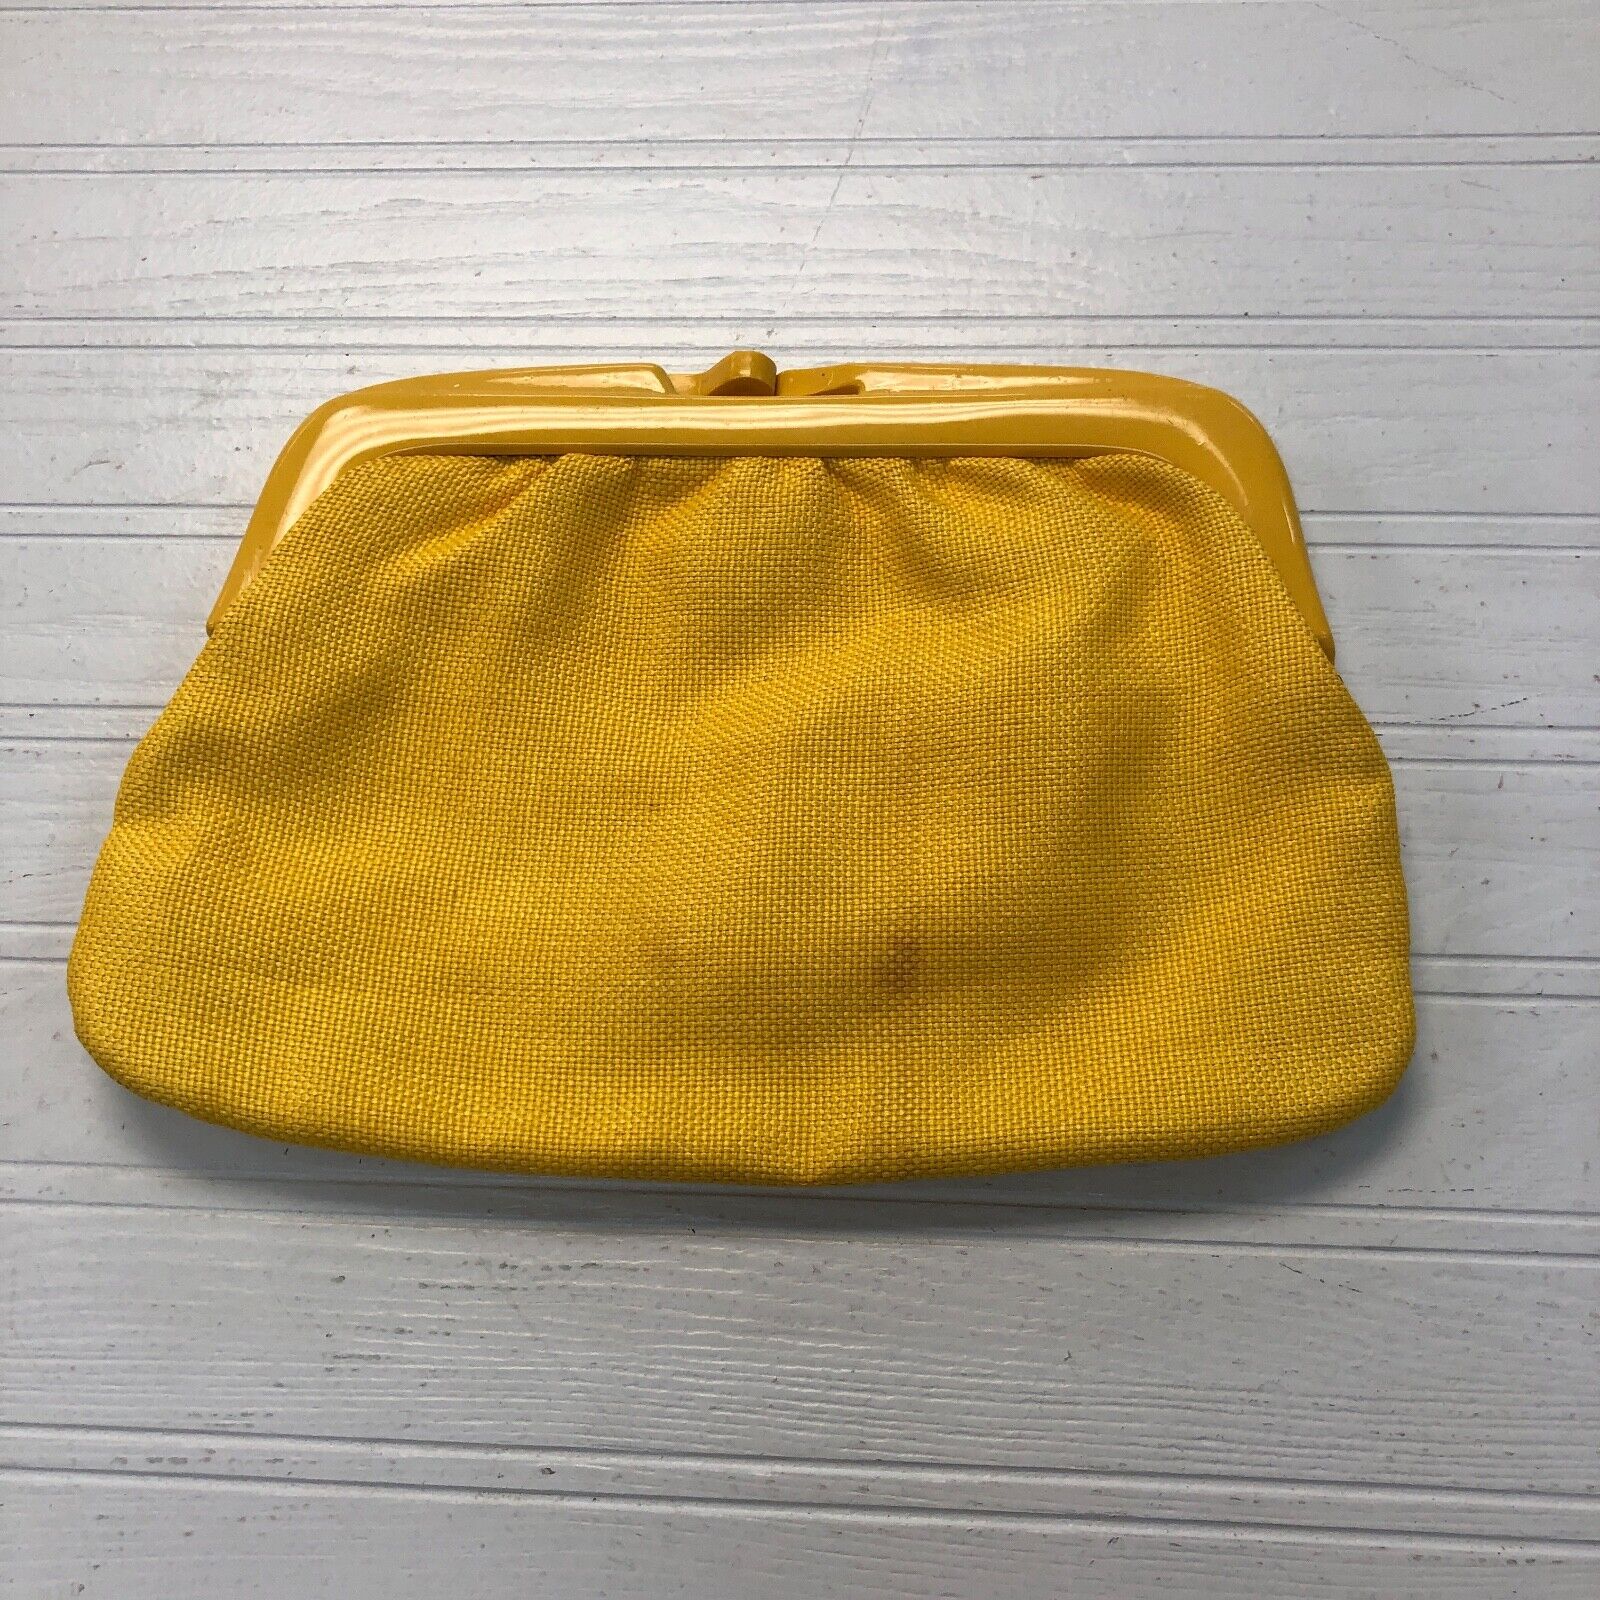 Yellow Canvas Solid Straw Casual Evening Clasp Clutch Small Bag Women's Purse